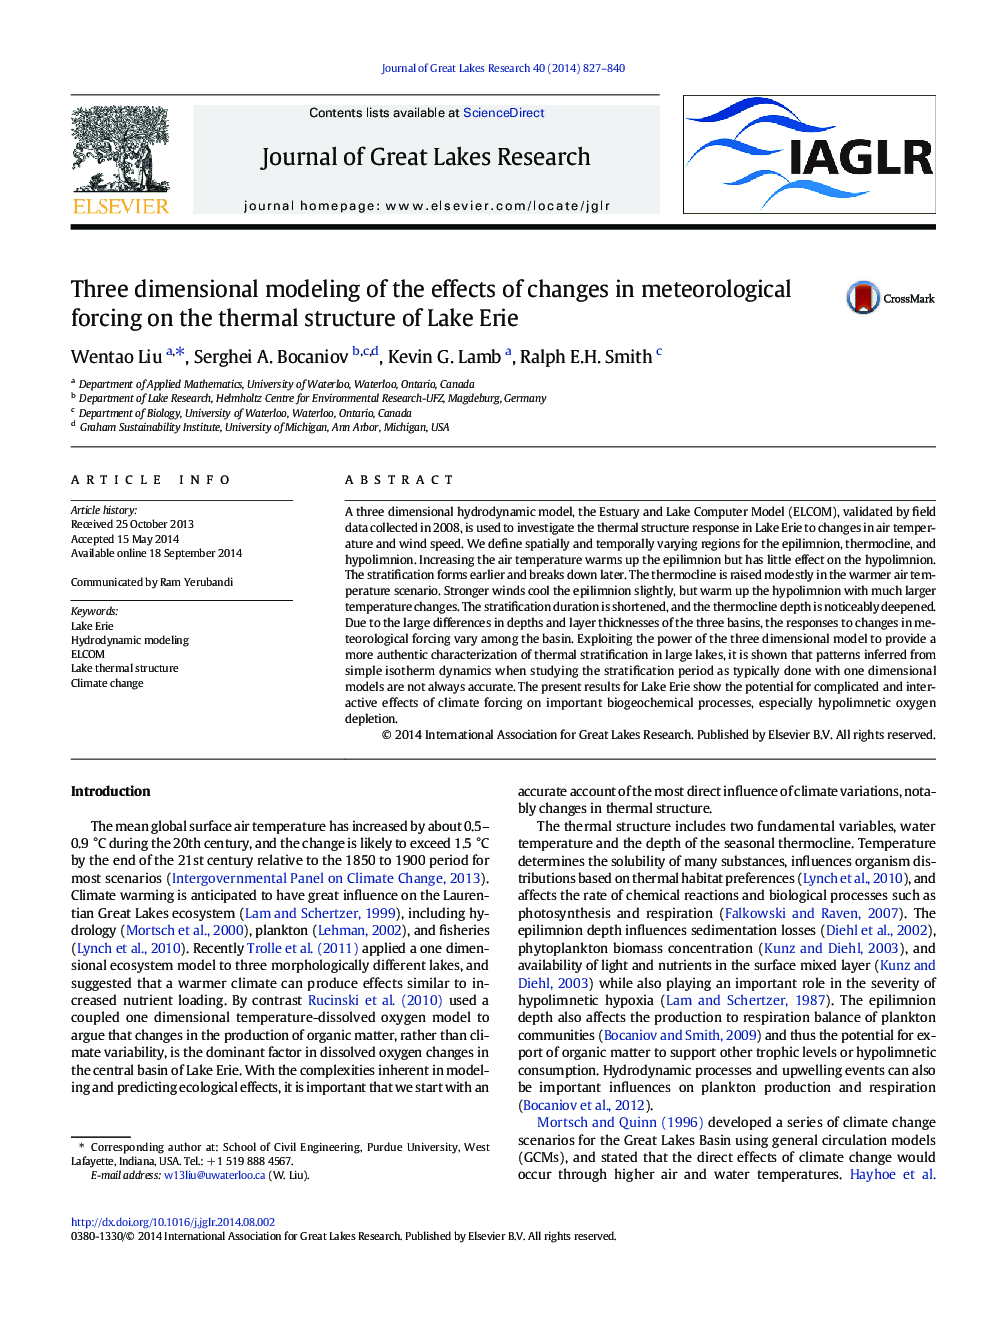 Three dimensional modeling of the effects of changes in meteorological forcing on the thermal structure of Lake Erie